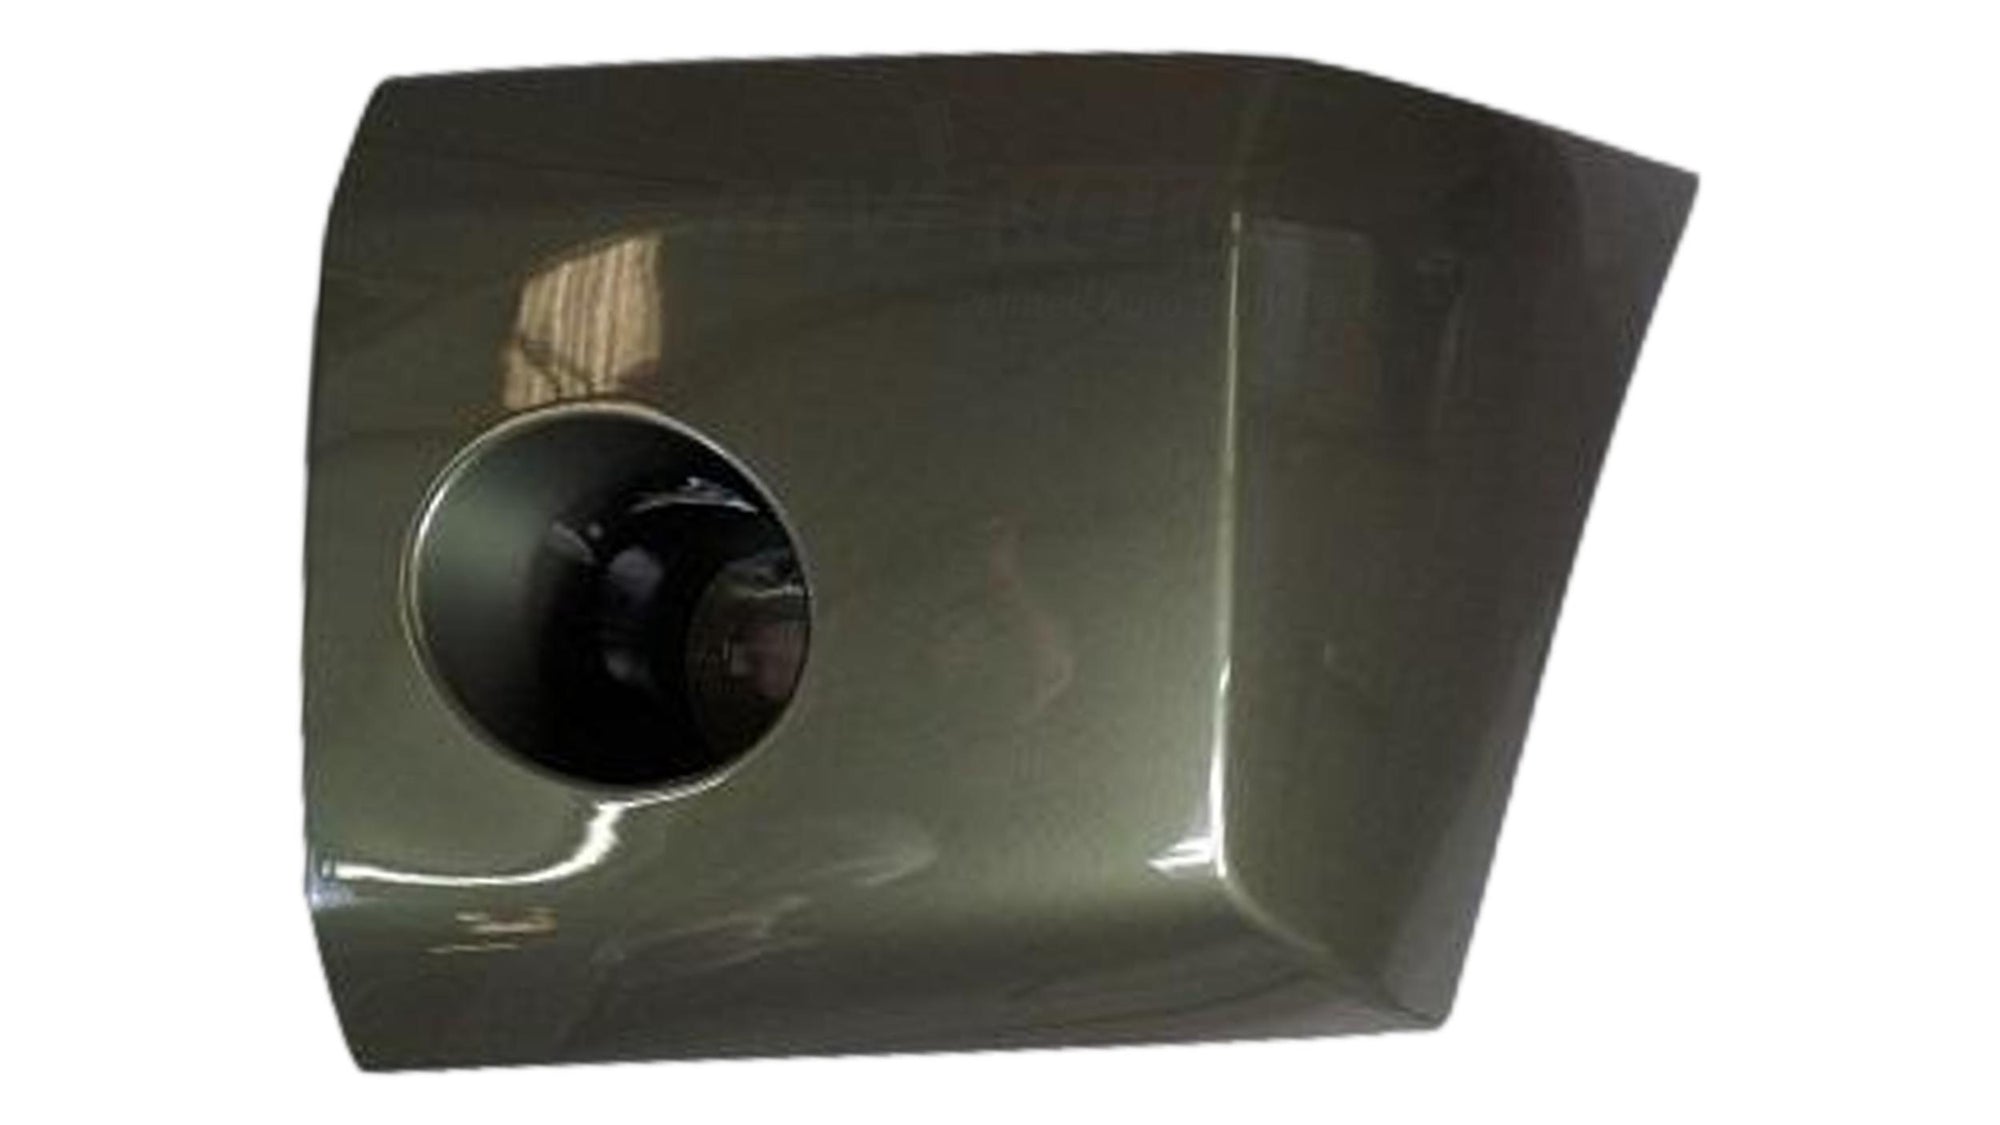 2004-2007 Nissan Titan Front End Cap Painted Canteen Metallic Green (D13) 620257S220 NI1004147 (Left, Driver-Side)